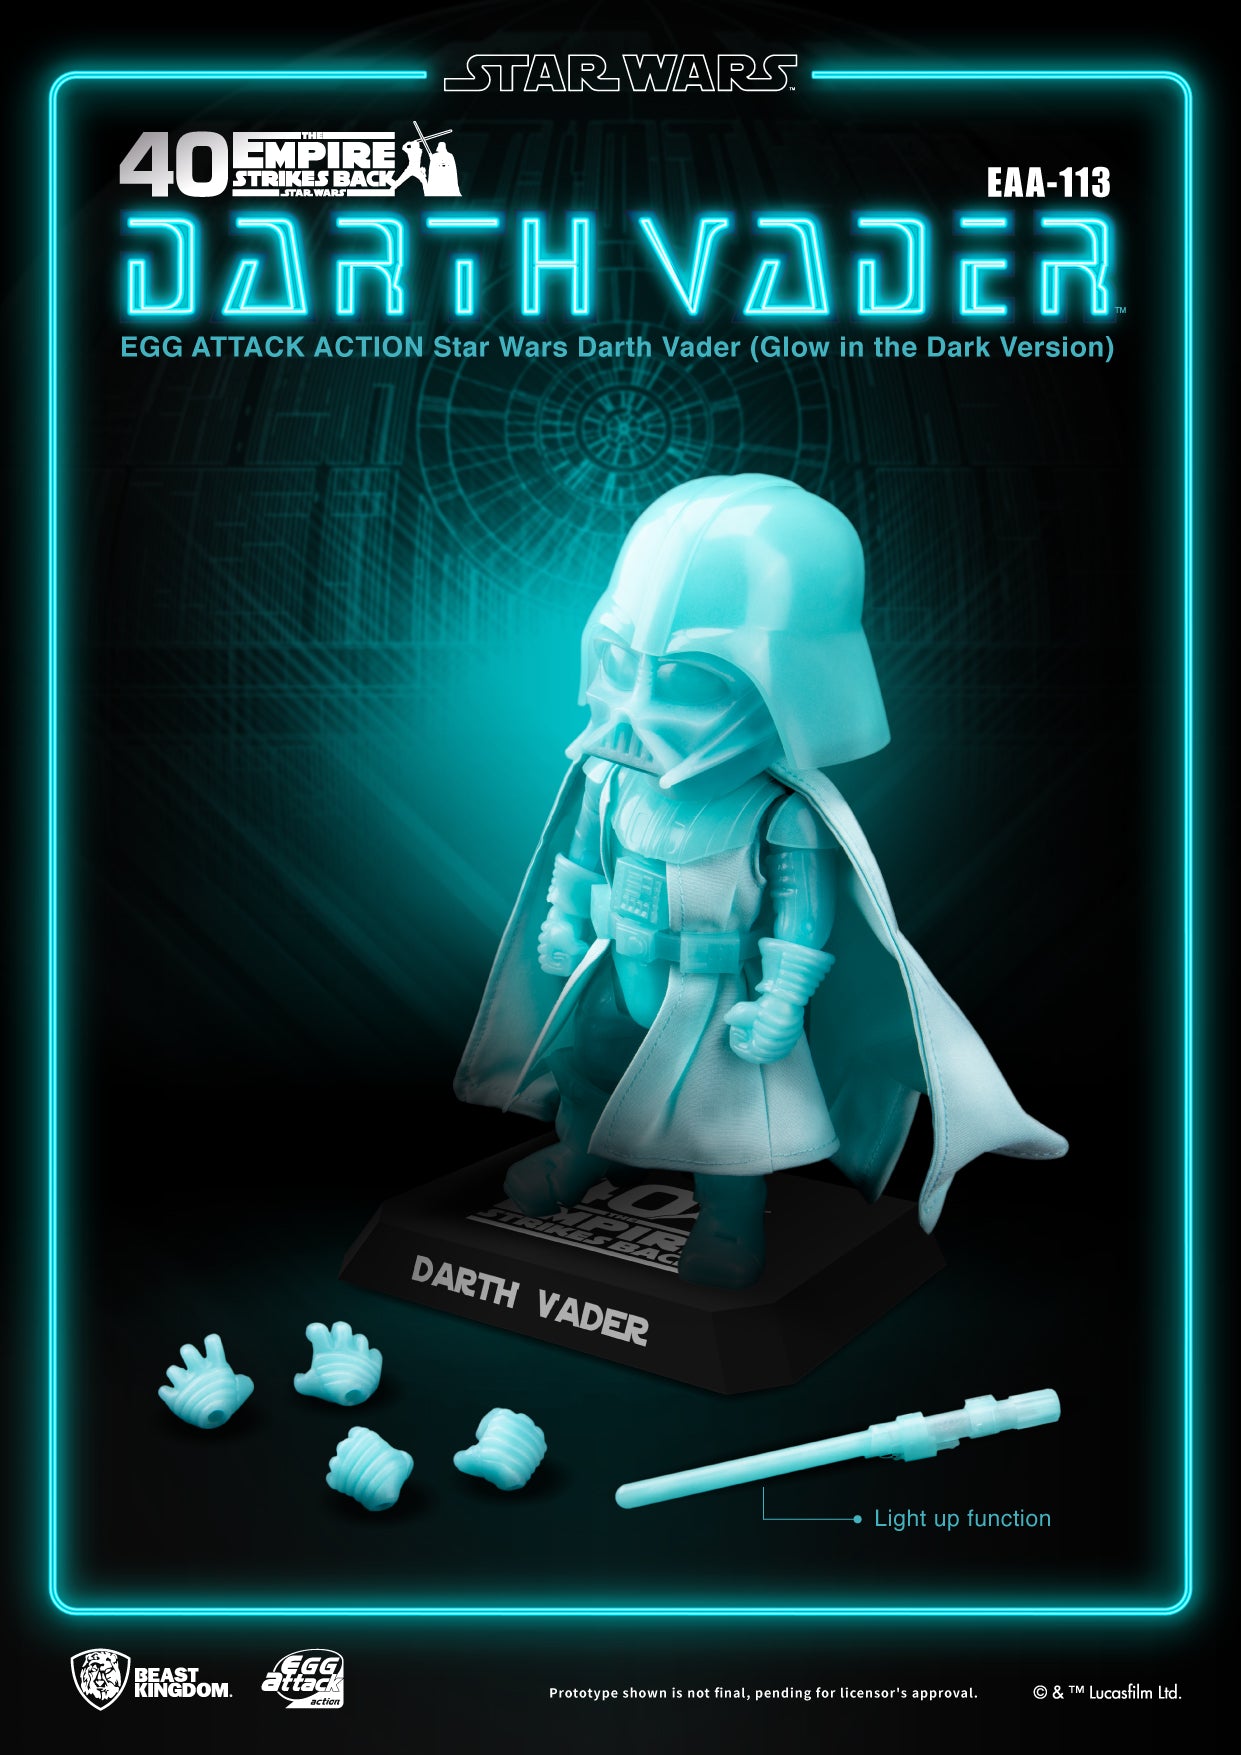 STAR WARS Darth Vader Glow In The Dark Ver (Egg Attack Action) EAA-113